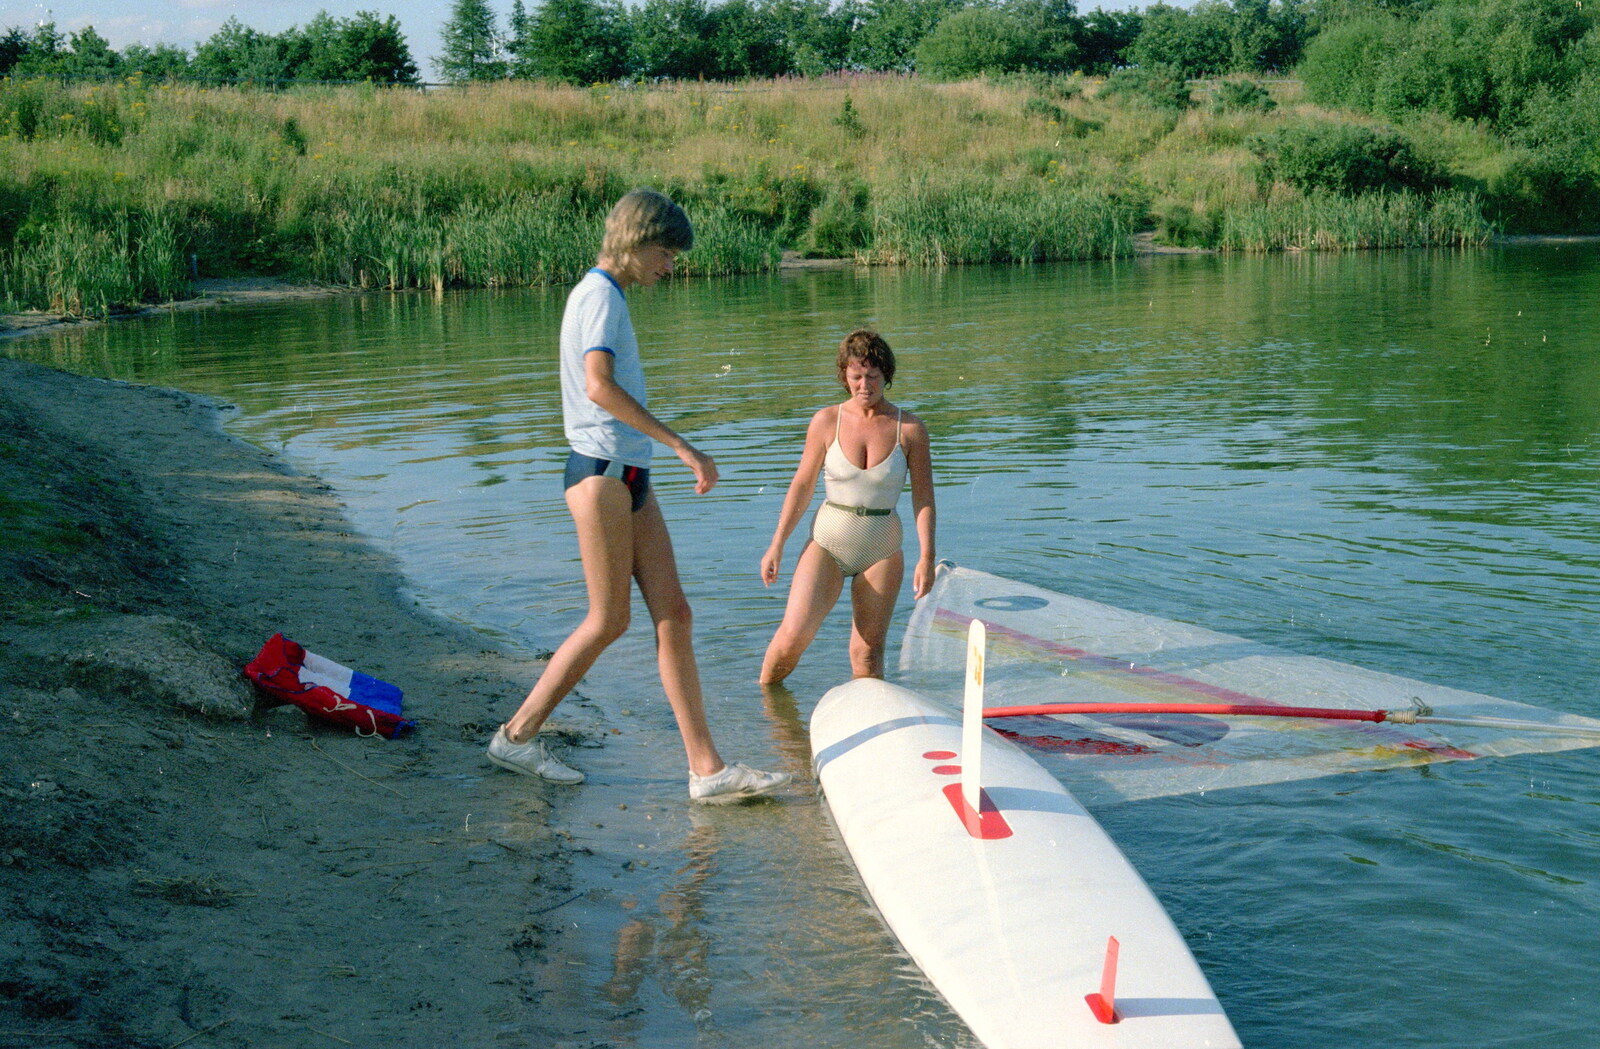 One more try on the windsurfer from Nosher Goes Windsurfing, Macclesfield, Cheshire - 20th June 1985